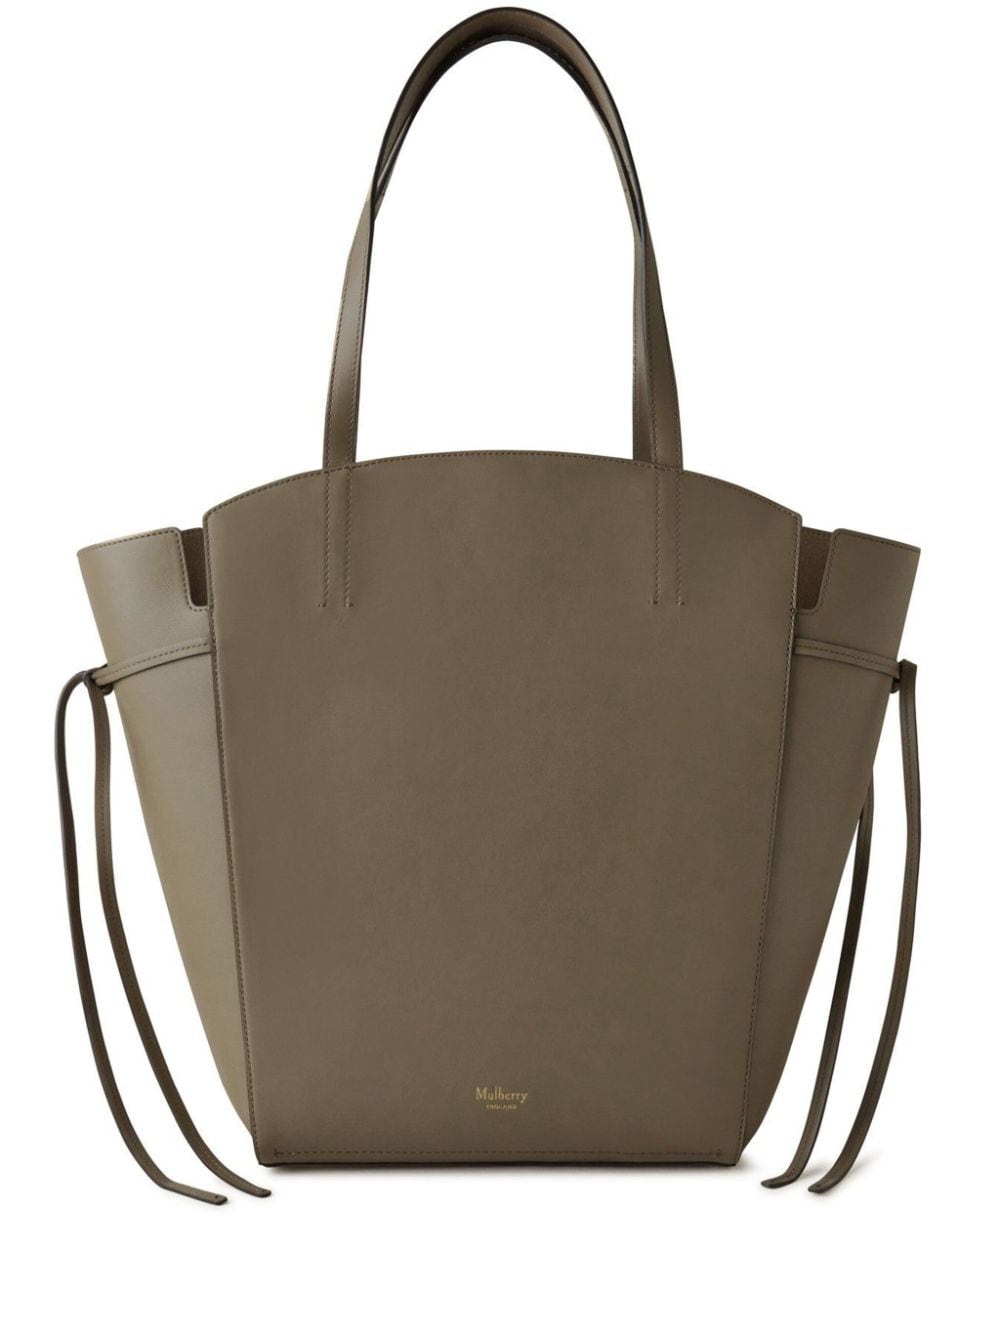 Mulberry Clovelly letaher tote bag - Green von Mulberry